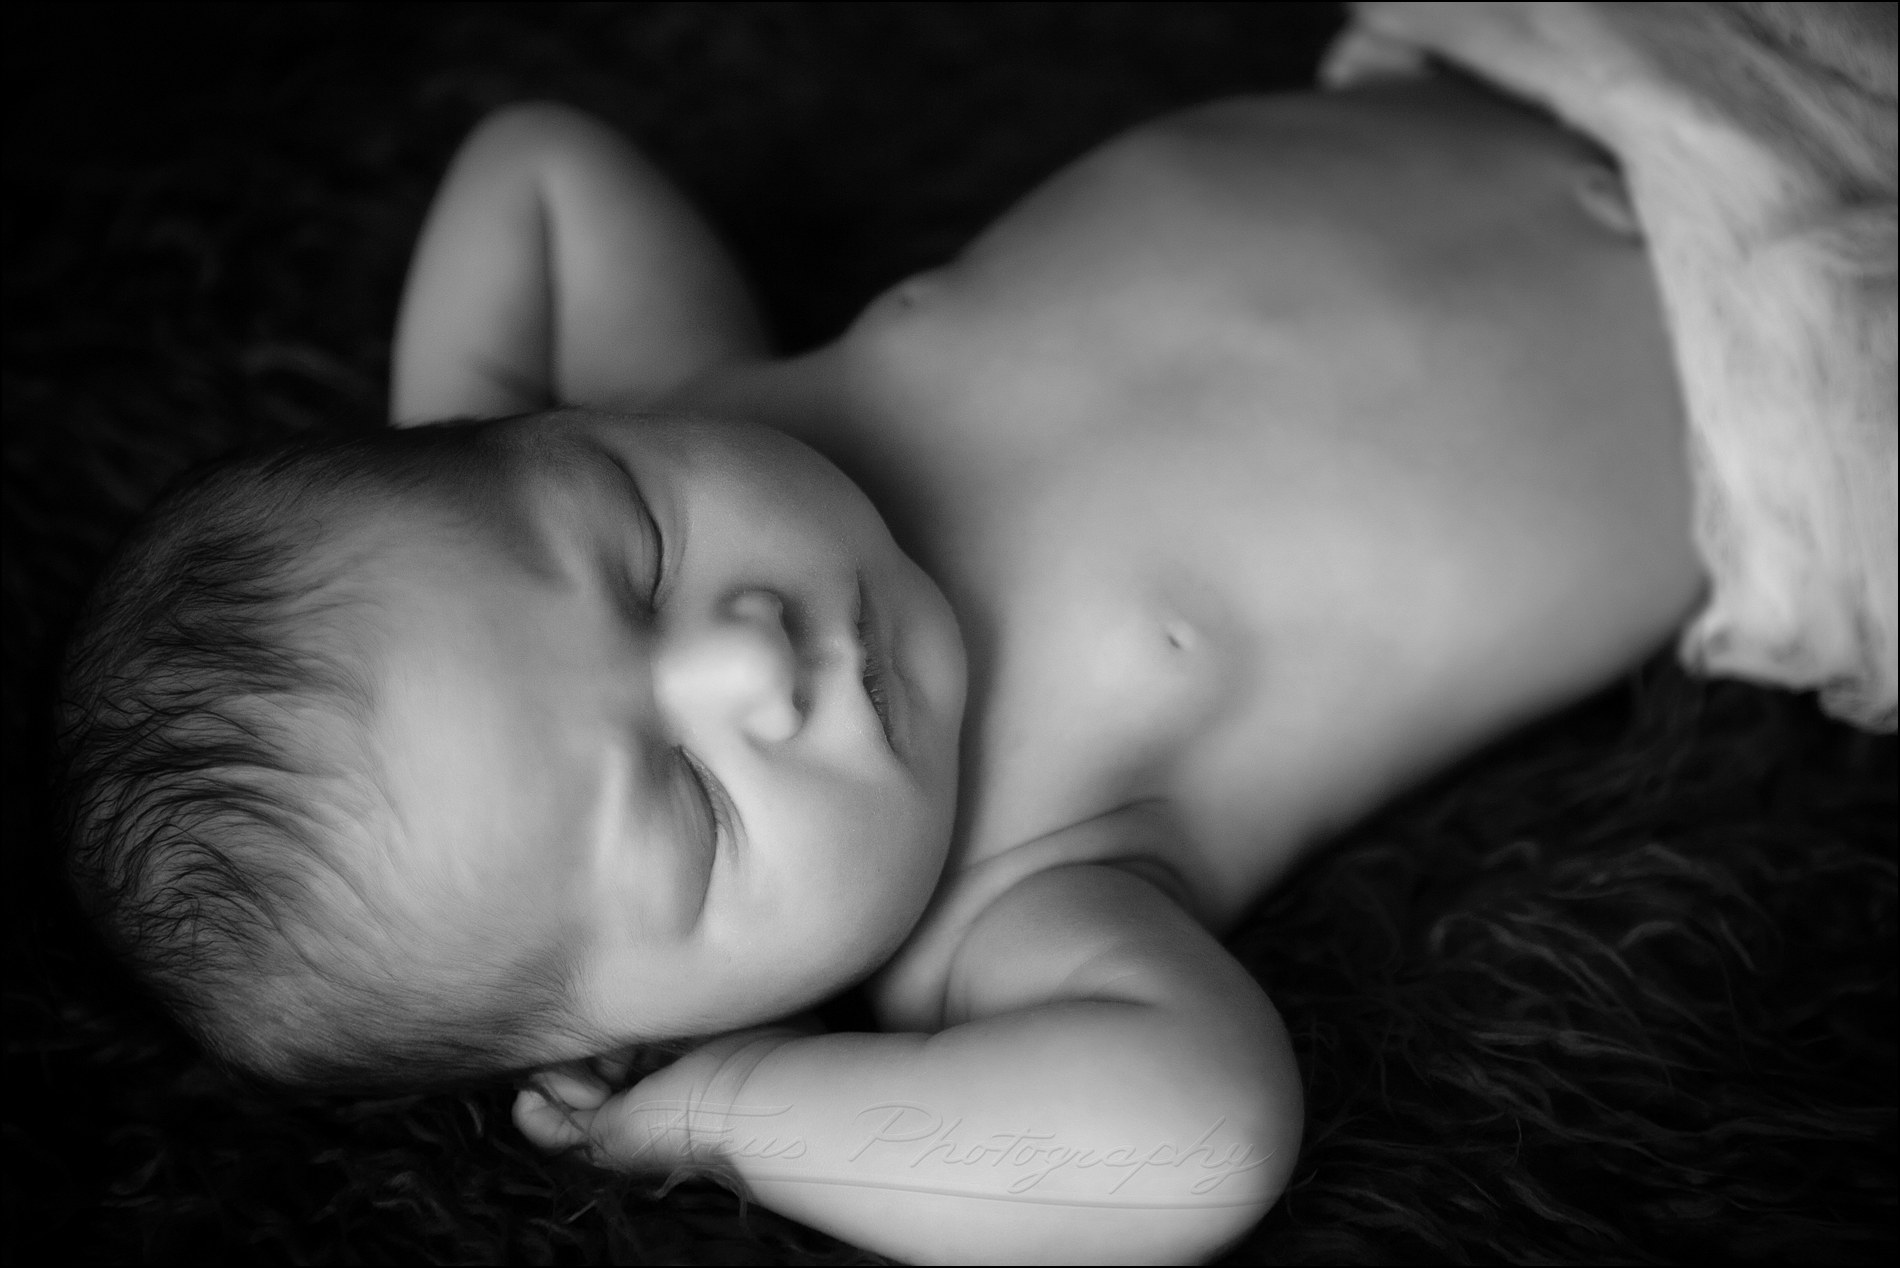 newborn baby in black and white image reclines and sleeps